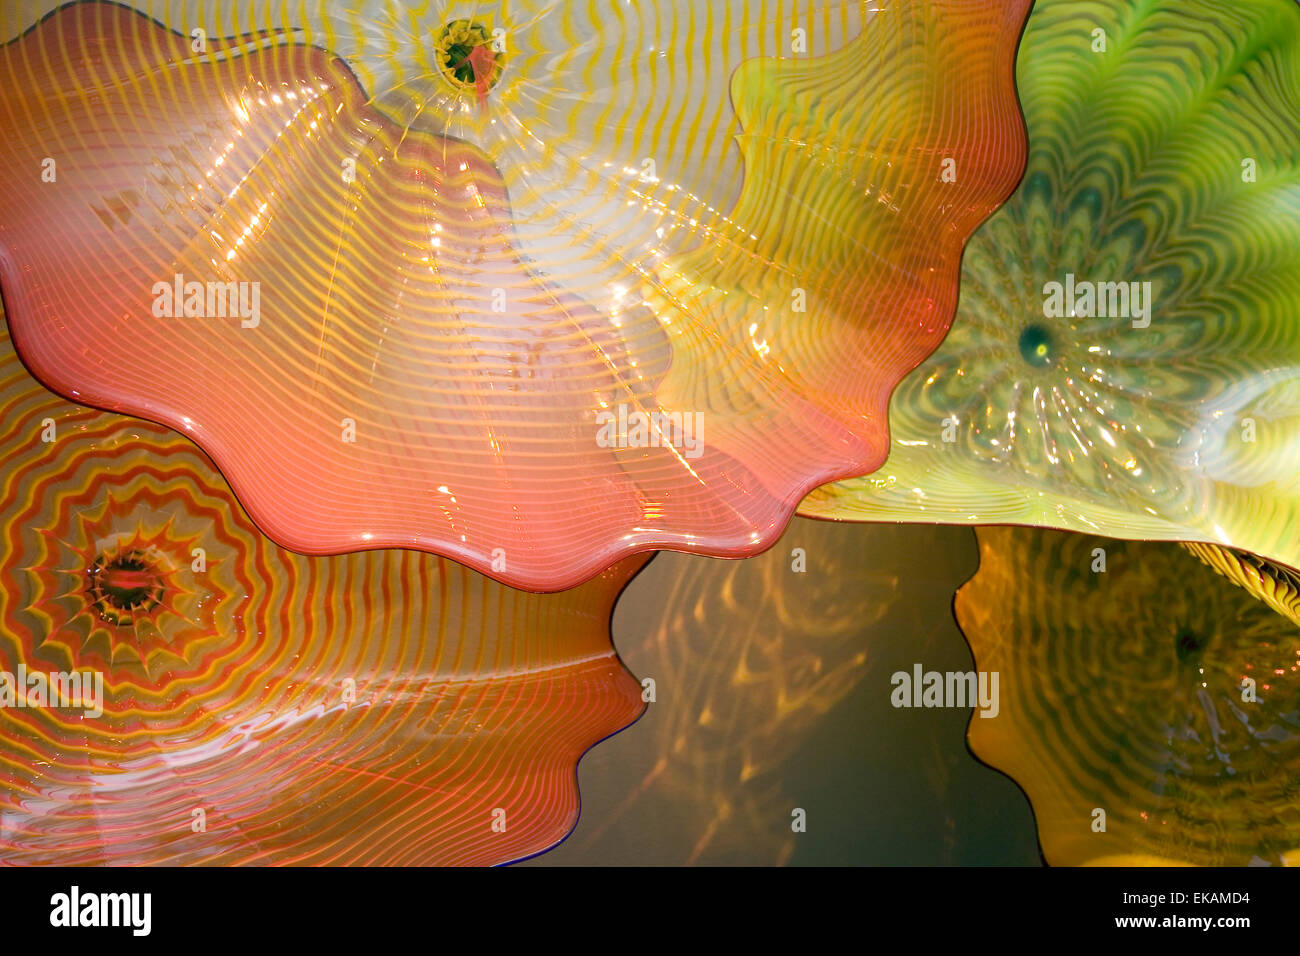 Detail der Kunst Glas Magie von Dale Chihuly in Oklahoma City Museum of Art, OK, USA Stockfoto